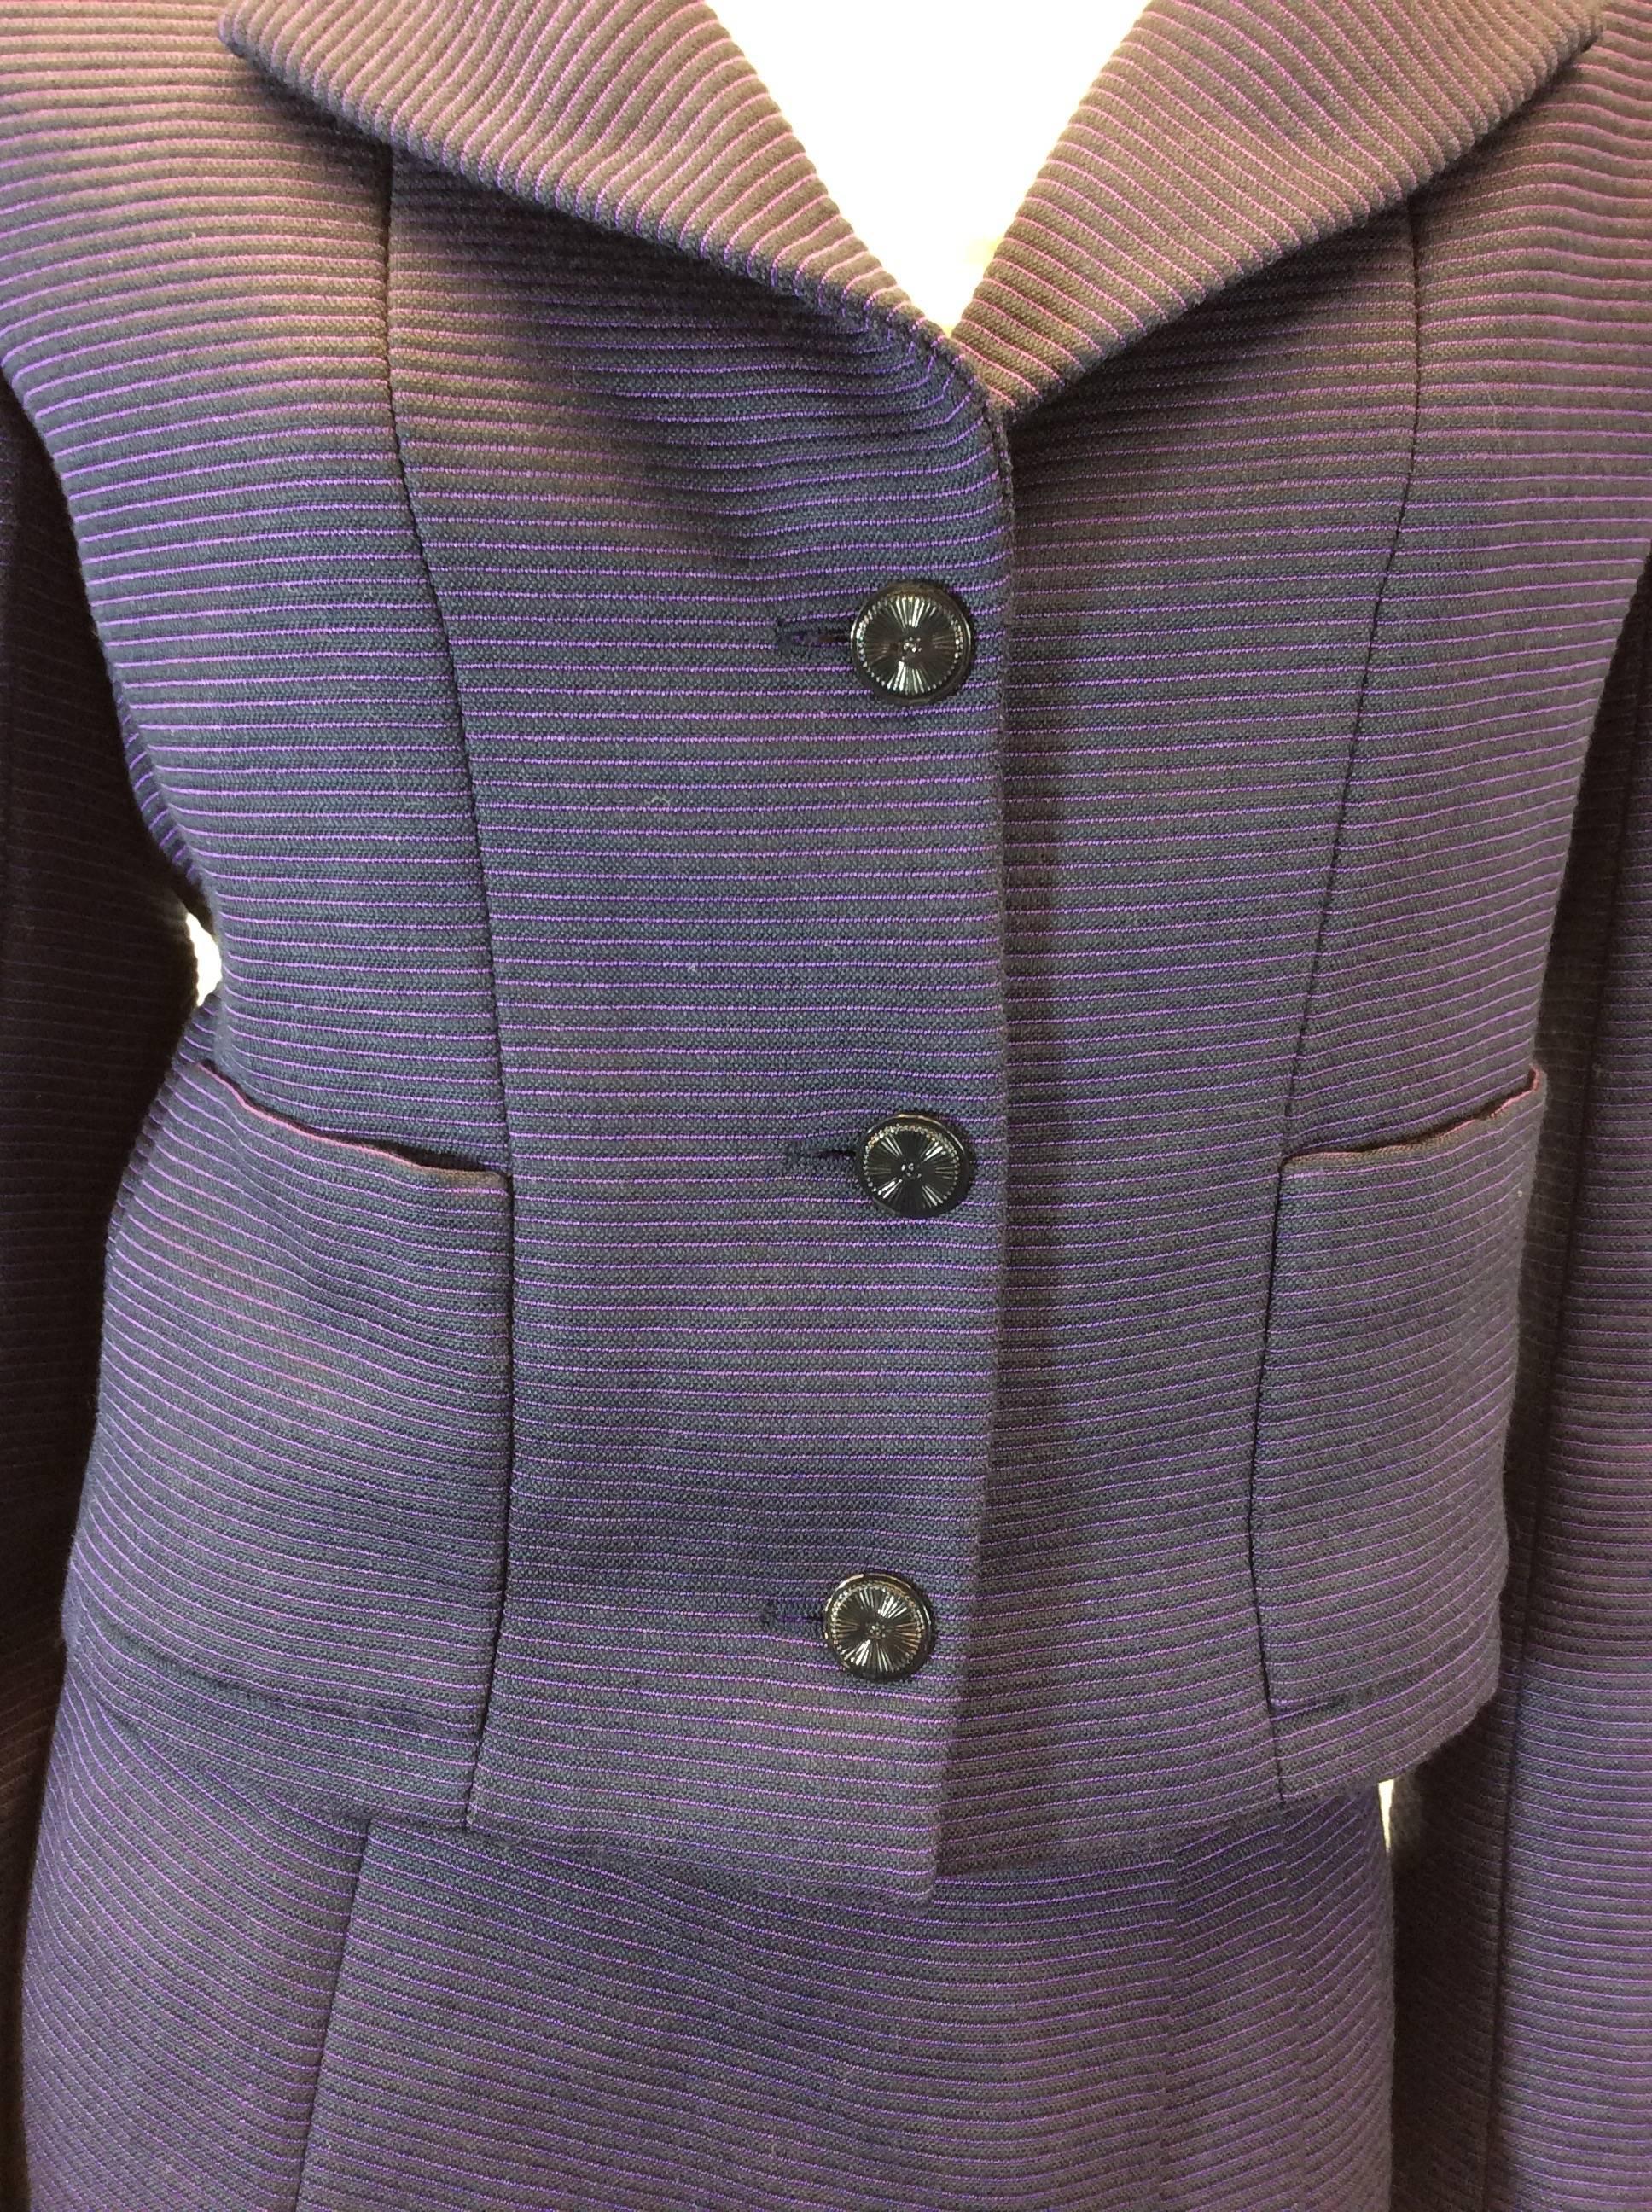 HOLIDAY FLASH SALE! 50% Off! Chanel Two Piece Purple Skirt Suit Set 5